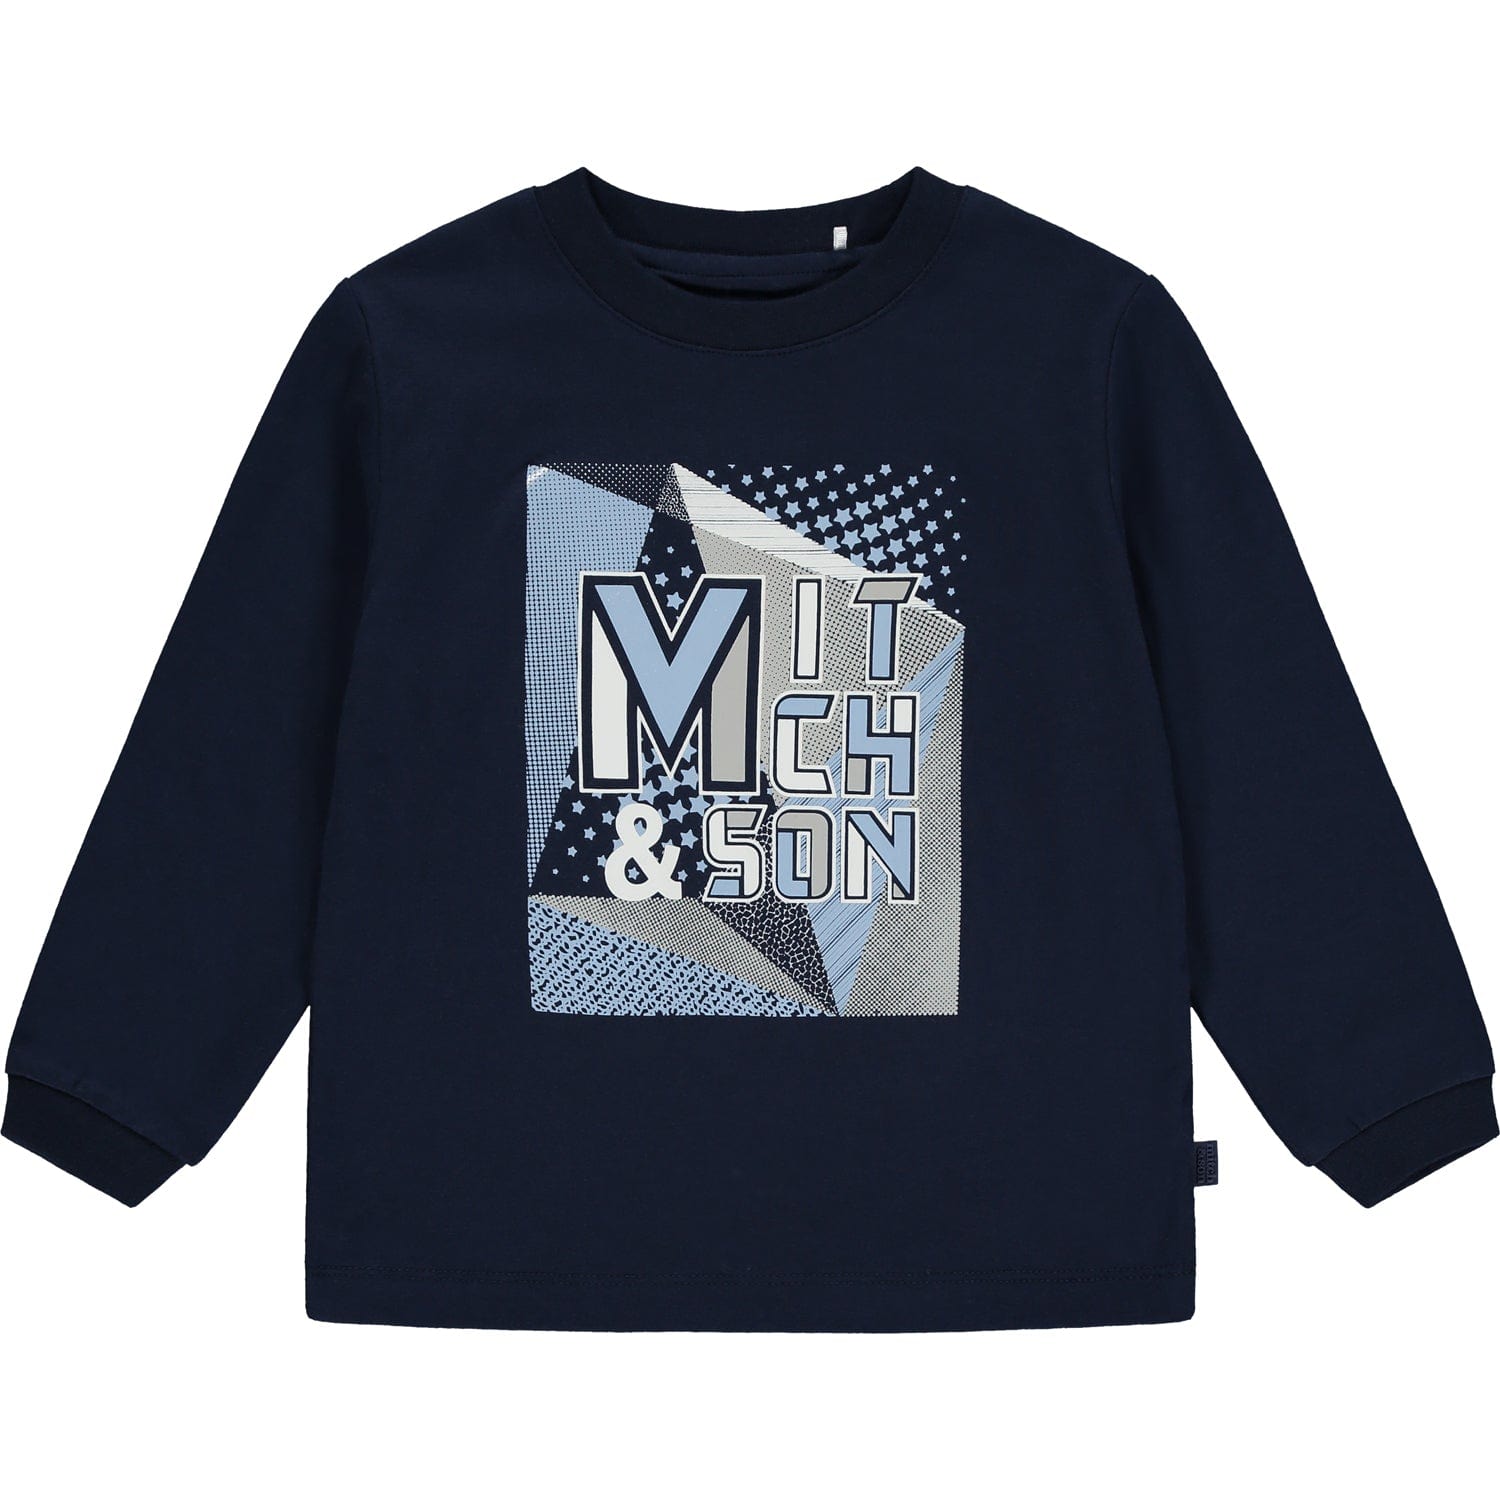 Mitch & Son Top Mitch & Son Blue Navy Presley Geometric Graphic Top